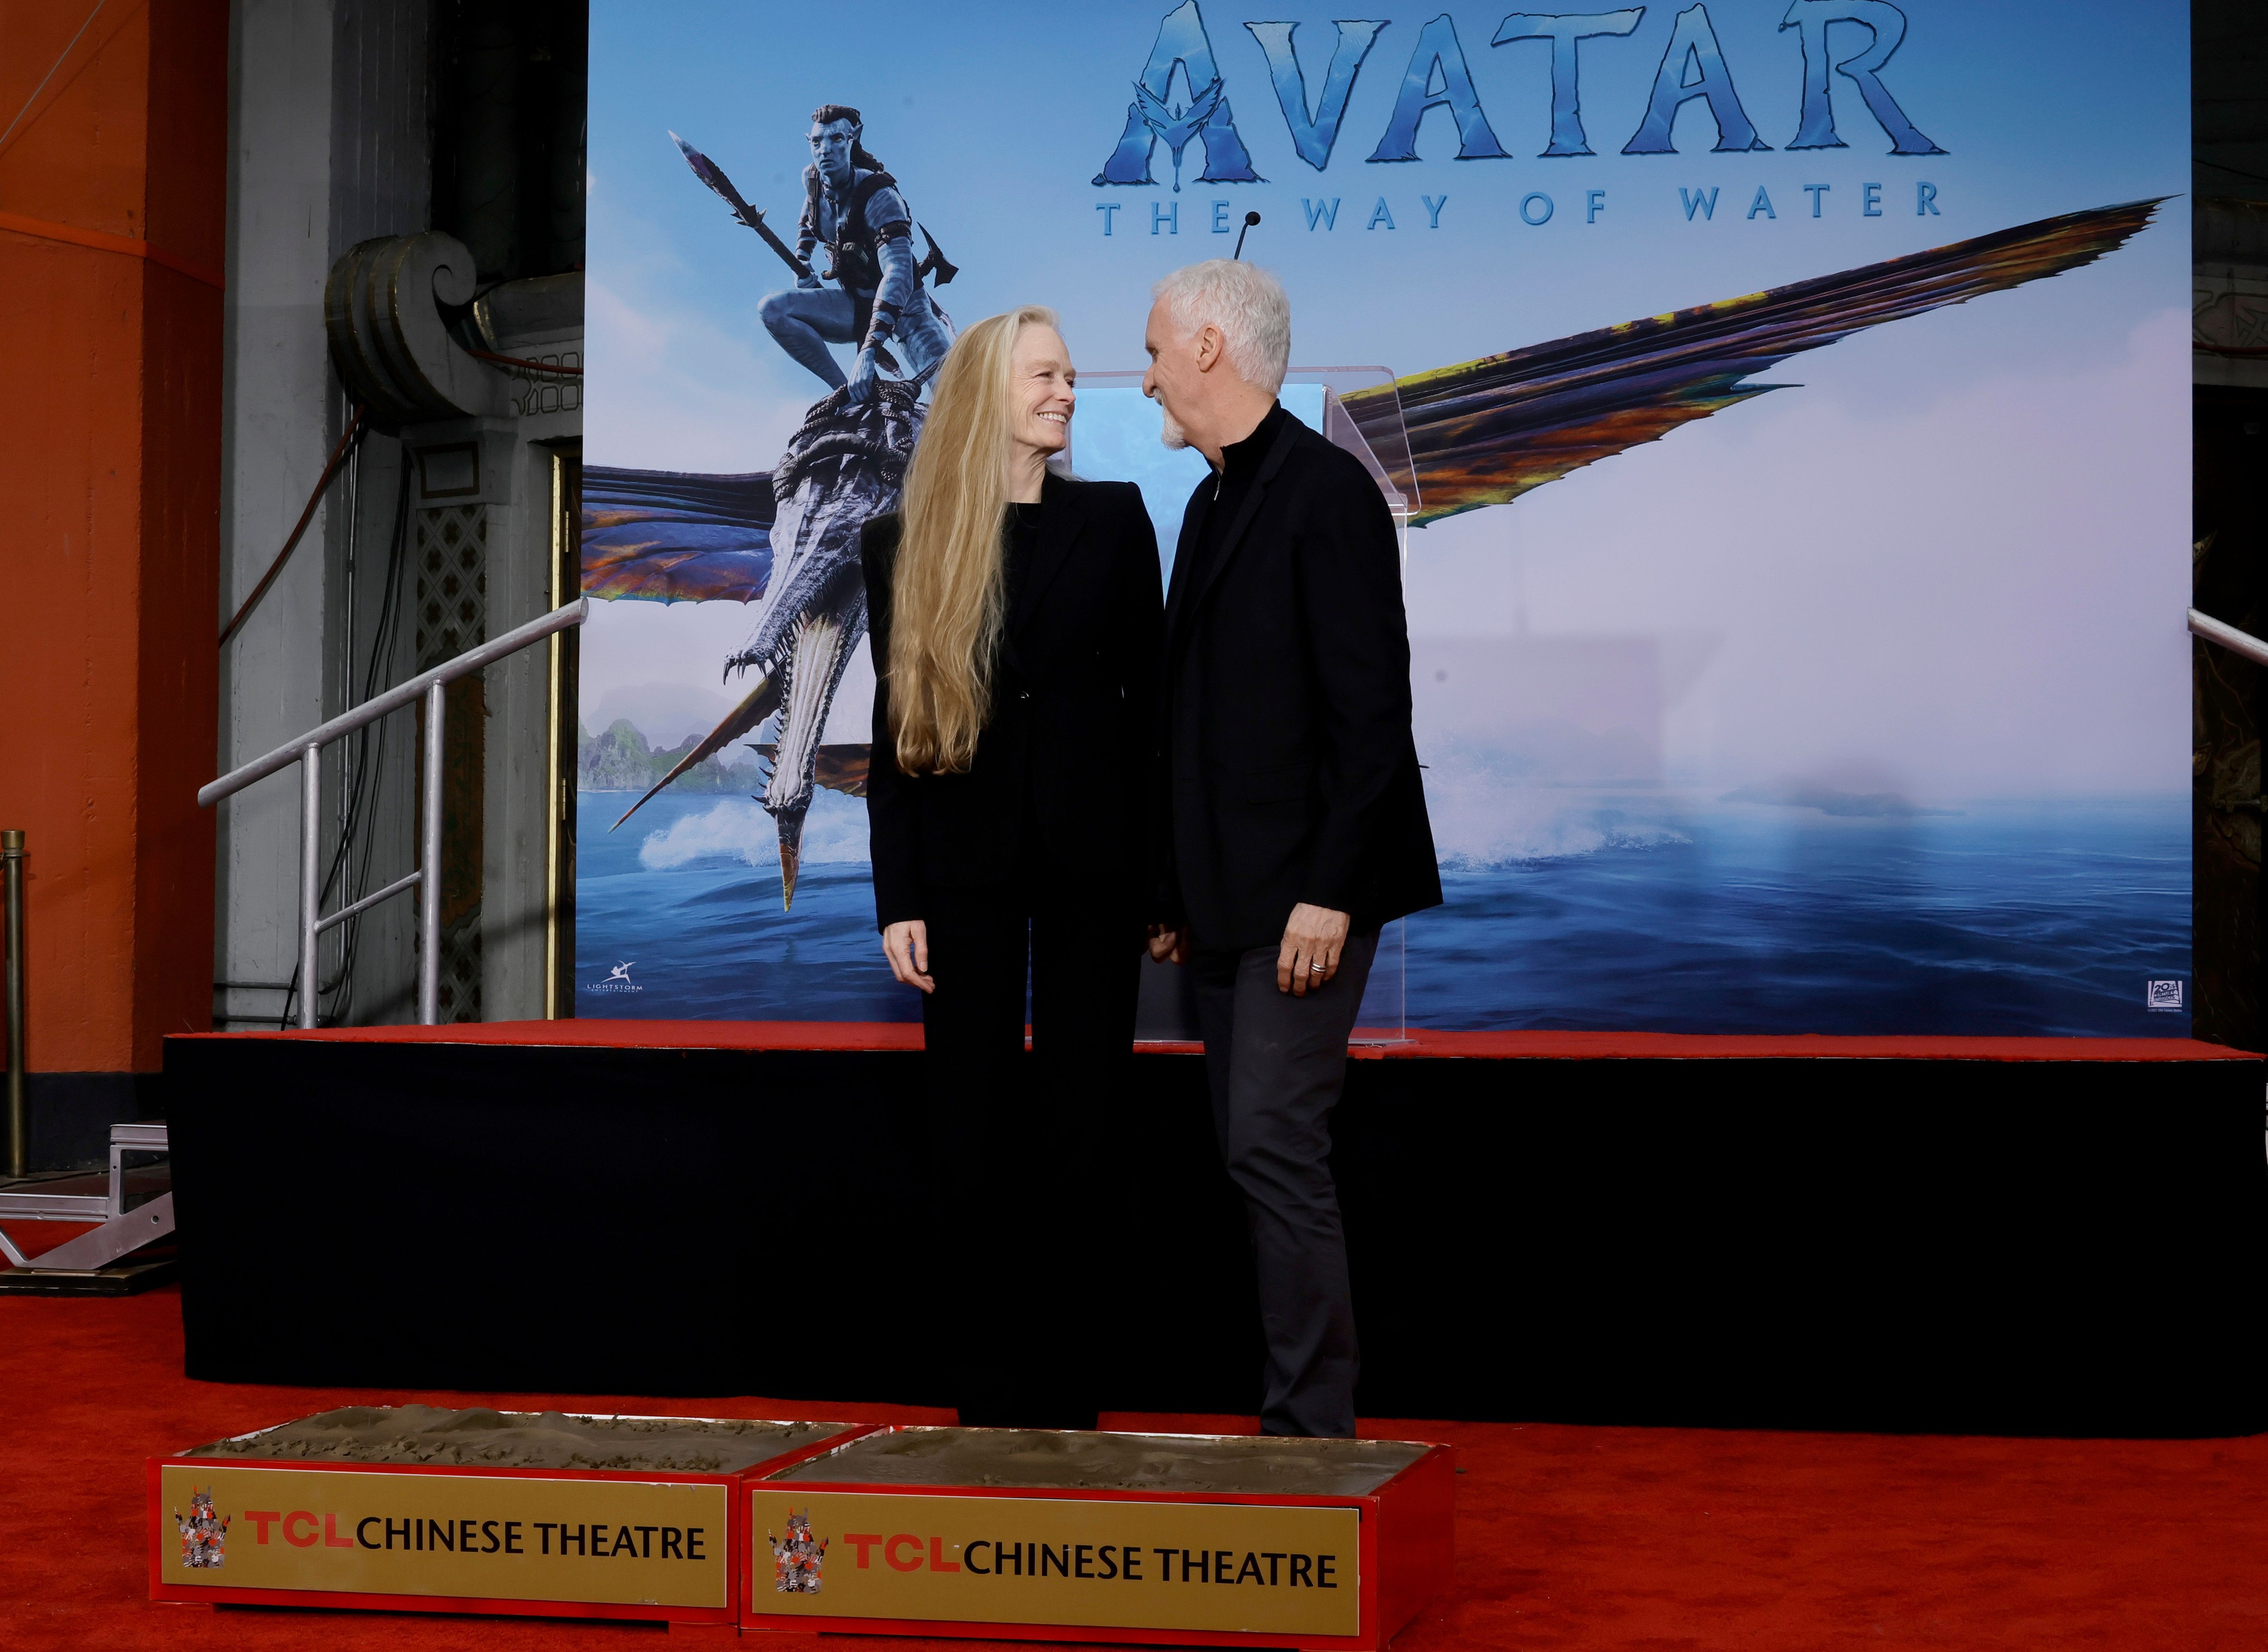 Suzy Amis Cameron und James Cameron im TCL Chinese Theatre am 12. Januar 2023 in Hollywood, Kalifornien | Quelle: Getty Images